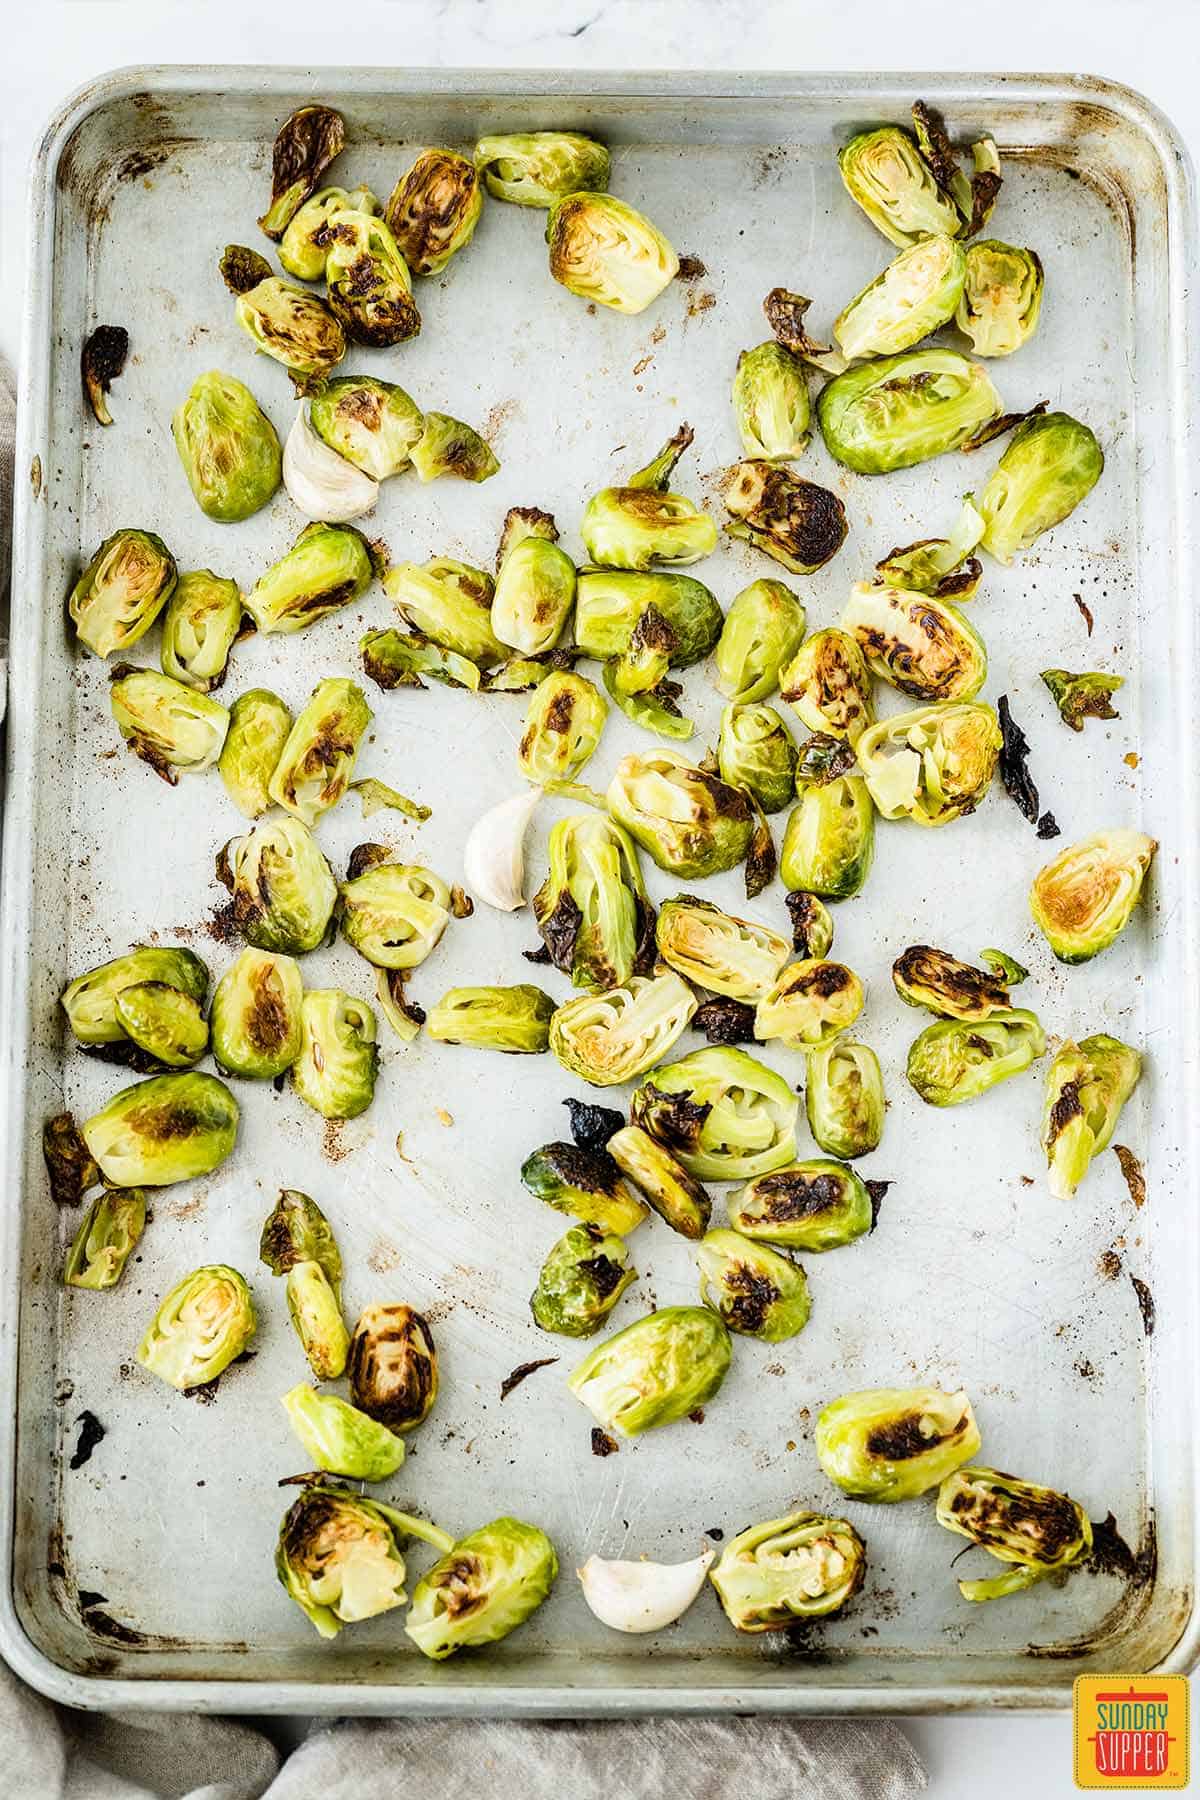 Roasted brussels sprouts on a sheetpan